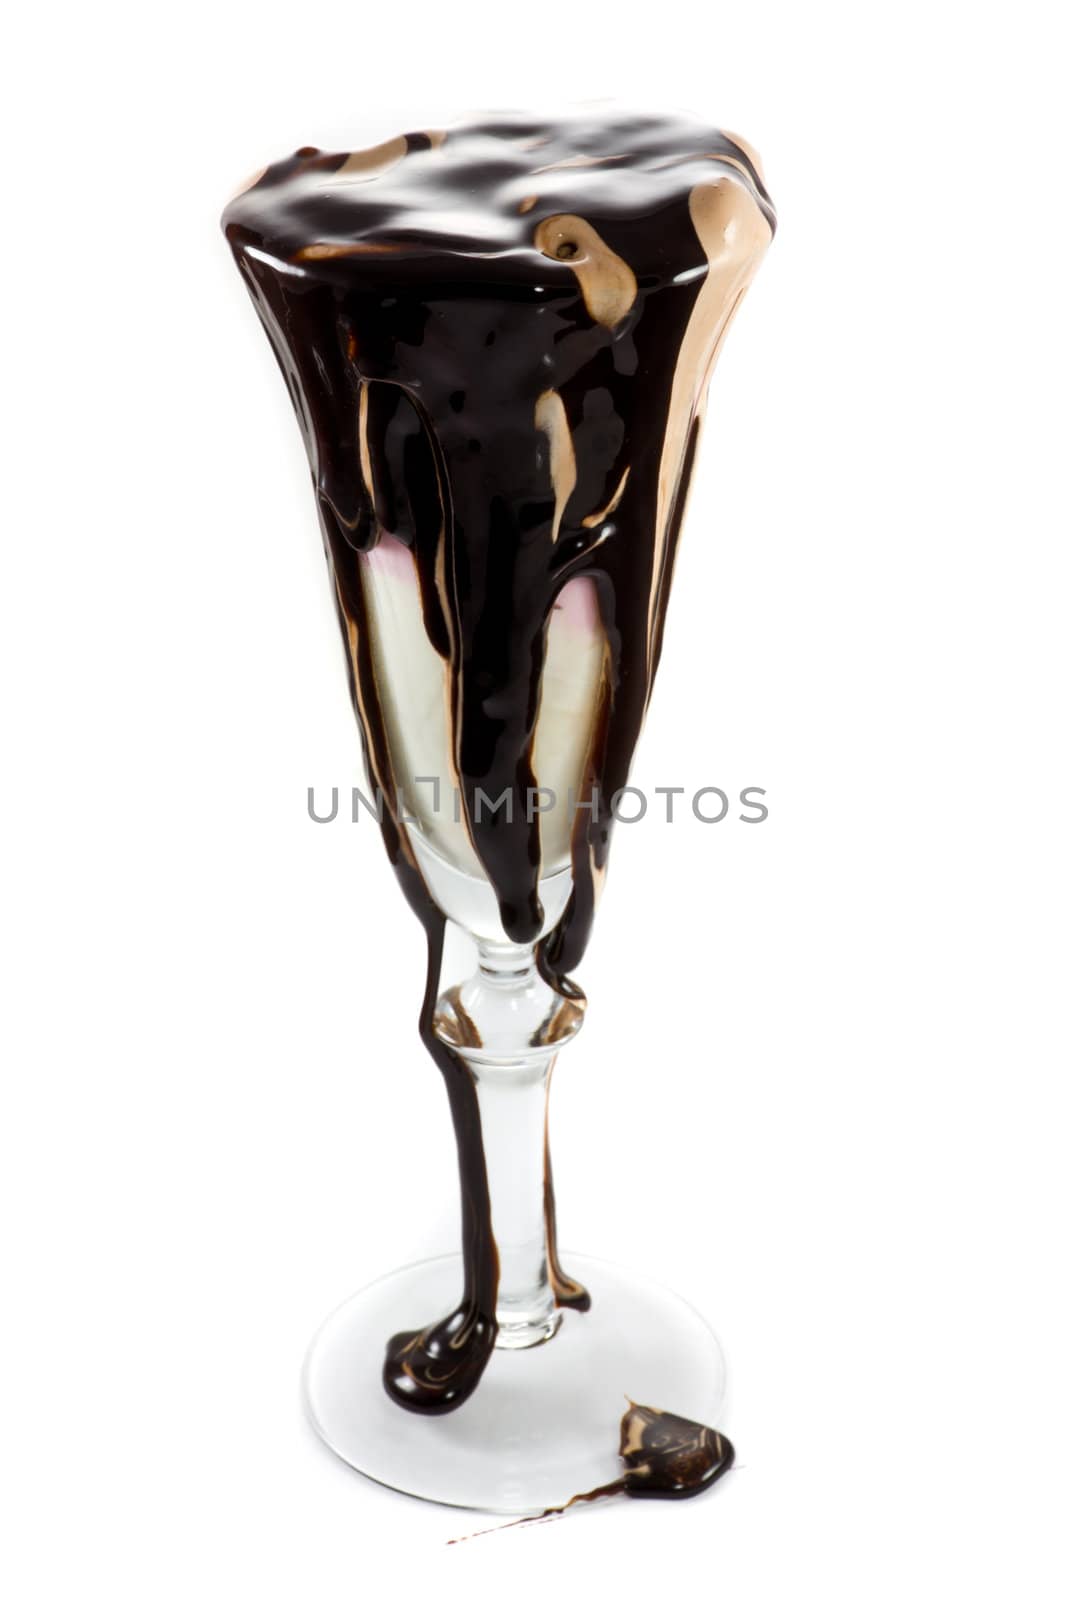 Icecream in a wine glass with massive amounts of chocolate topping